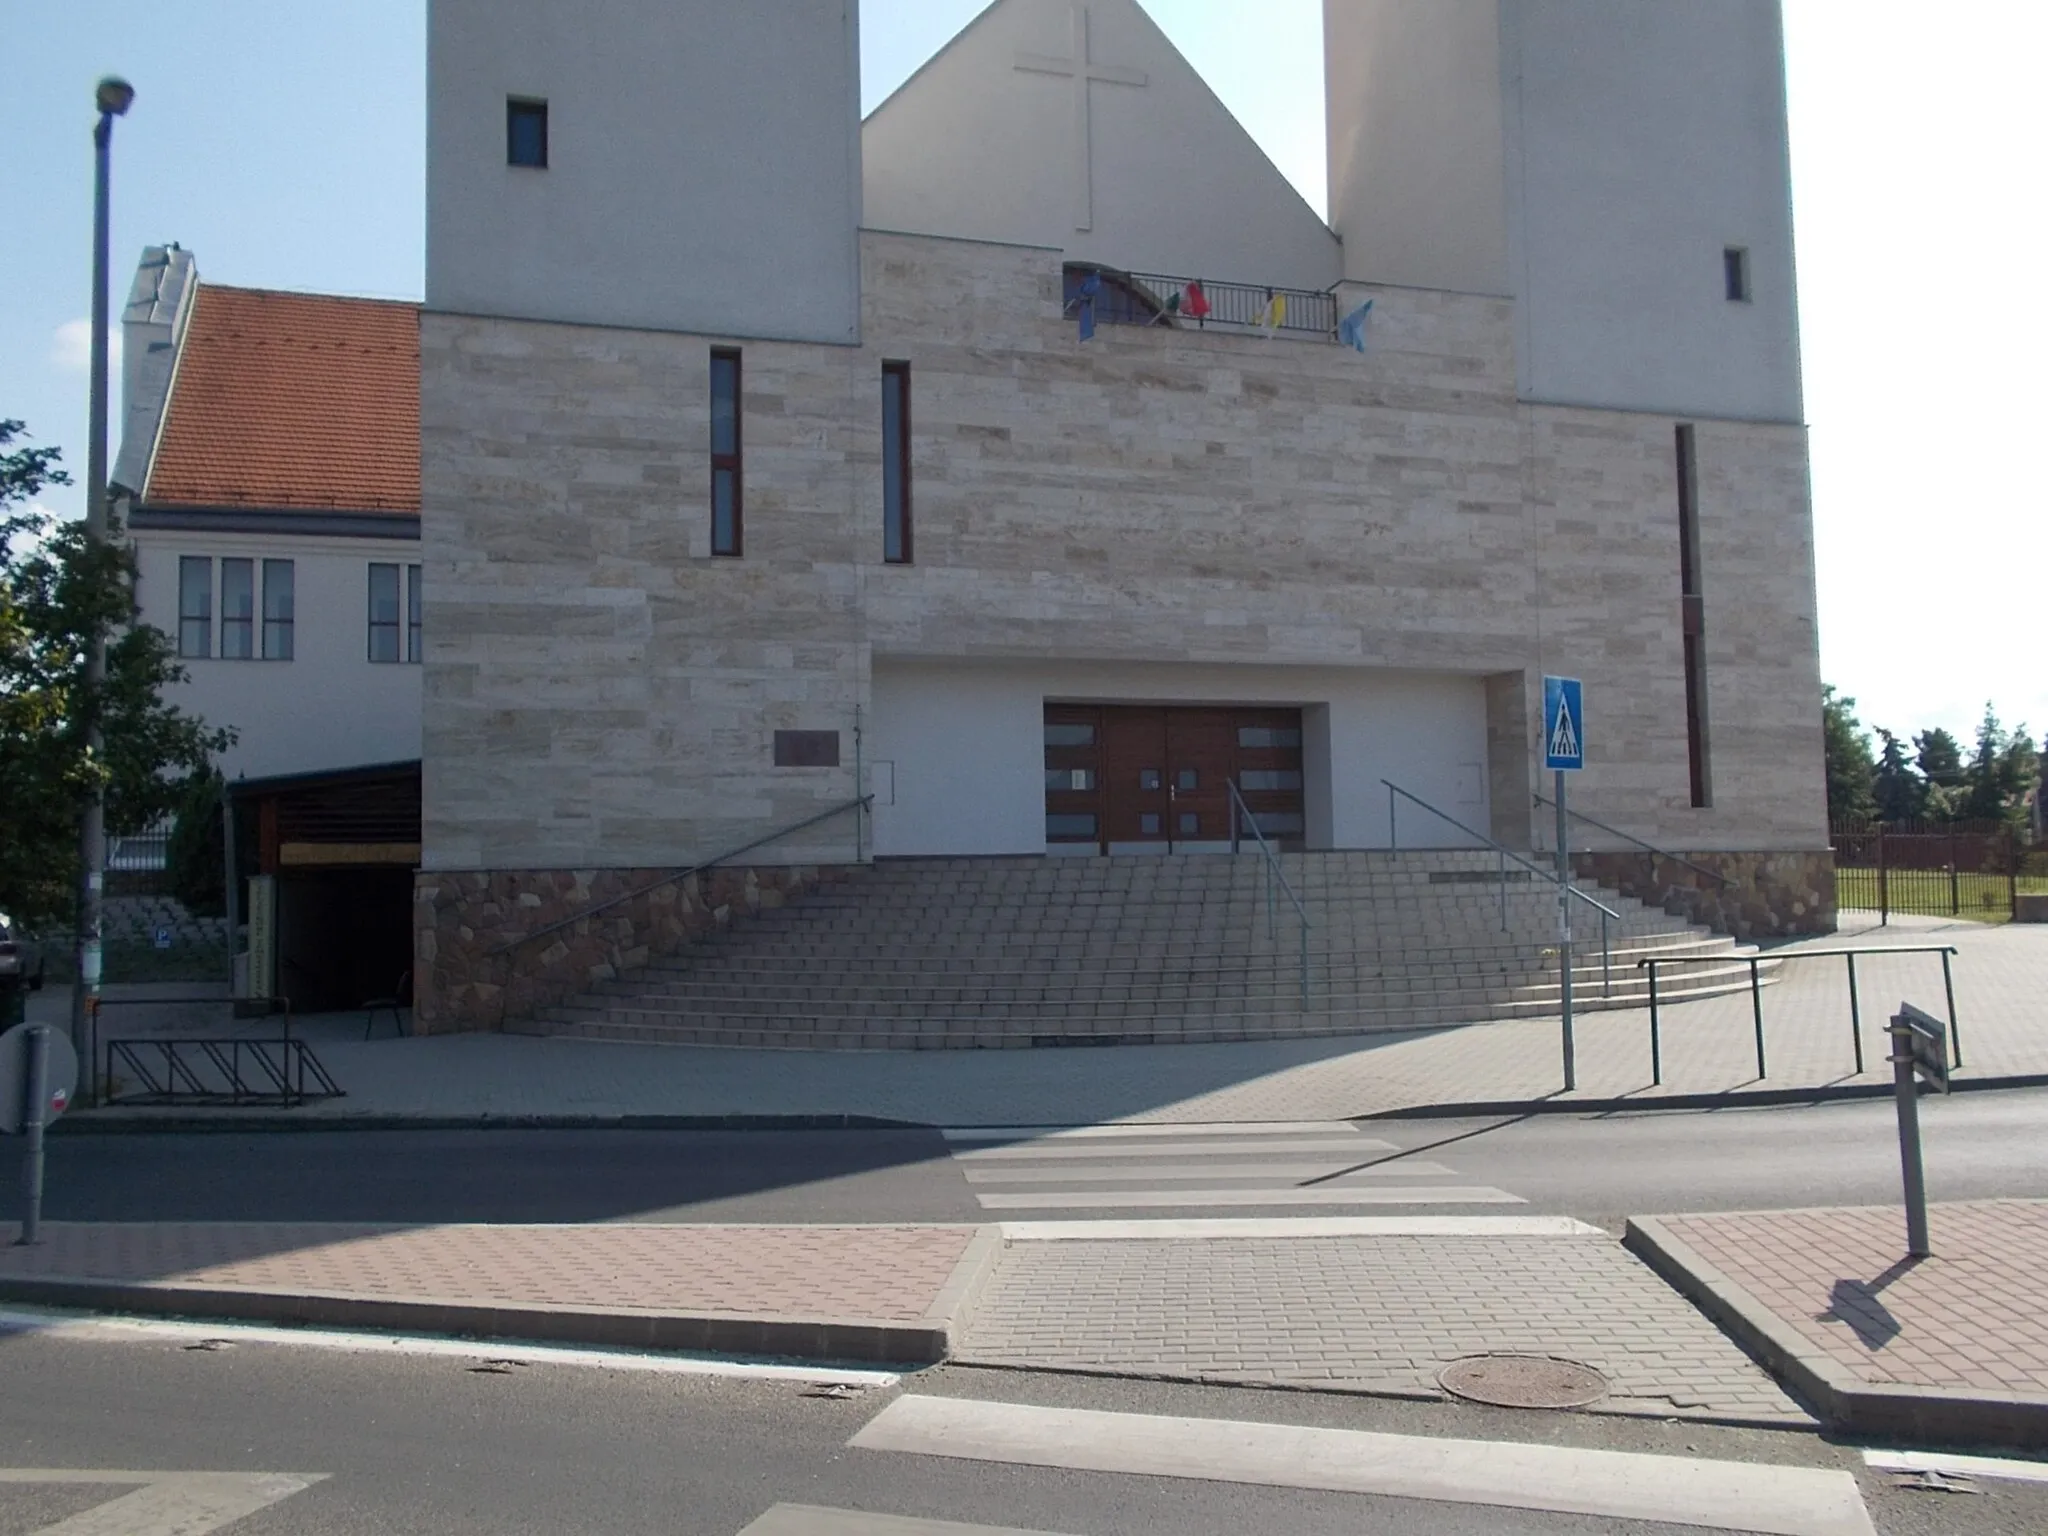 Photo showing: : Saint Nicholas church. Planned by Imre Trummer in 1996; foundation stone in 1998; church foundation completed in 2001-2002, All Saints Chapel completed in 2003, church nave and gallery/choir completed in 2006-2007.  The church's community hall and sacristy were completed 2008. The two 44-meter high towers in 2013. - Szent Erzsébet tér and Bajcsy-Zsilinszky utca corner, Szigetszentmiklós, Pest County, Hungary.